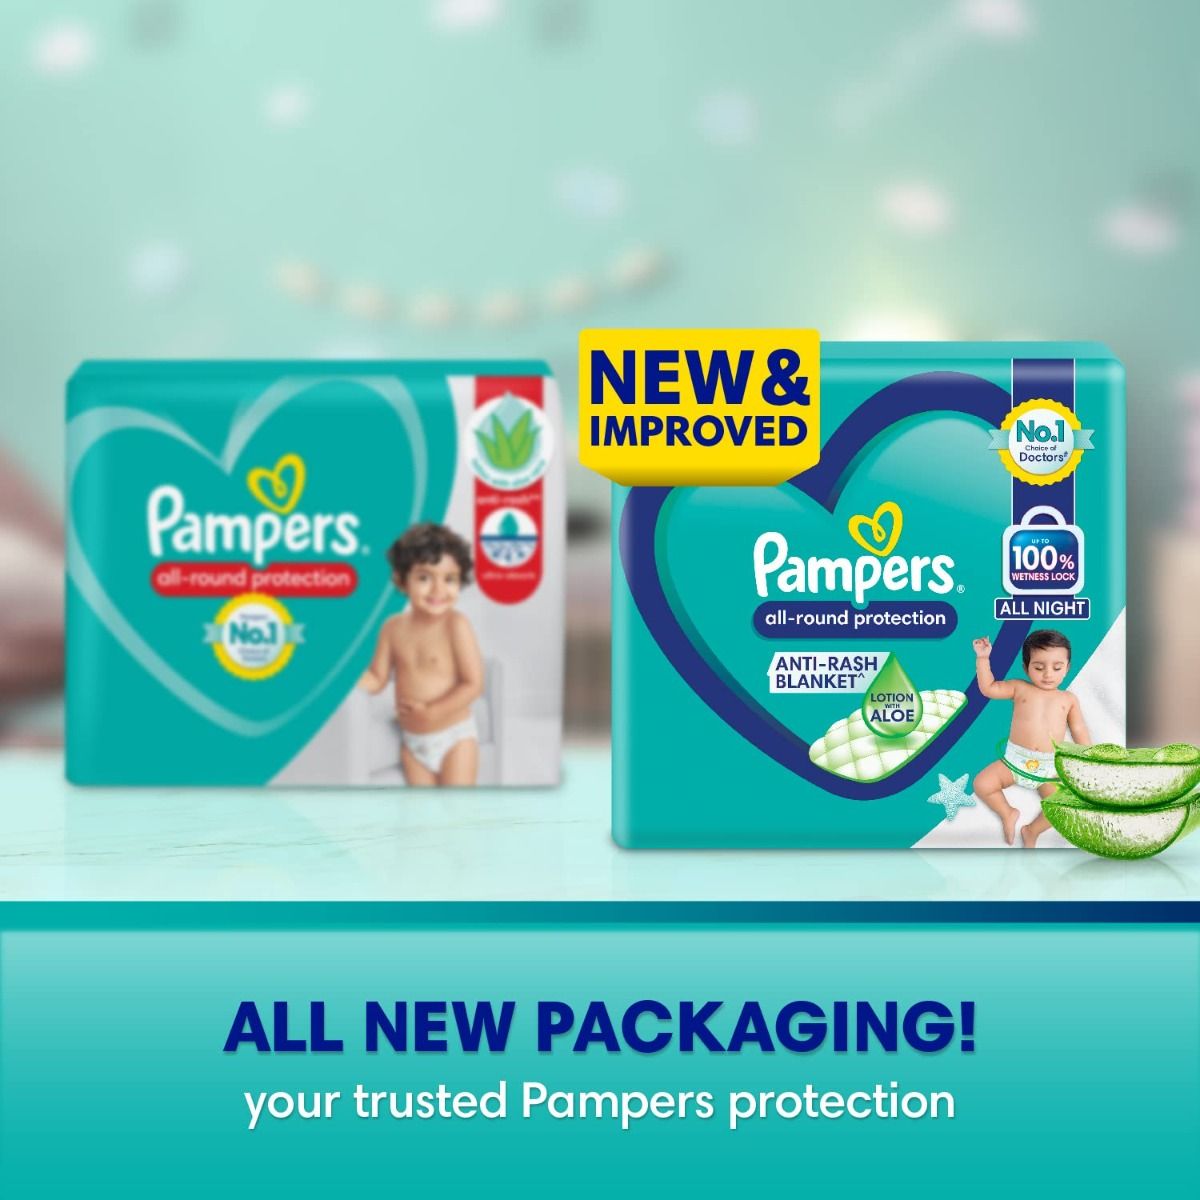 Buy Pampers All round Protection Pants Style Baby Diapers XLarge XL  Size 56 Count Anti Rash Blanket Lotion with Aloe Vera 1217kg Diapers  Online at Low Prices in India  Amazonin